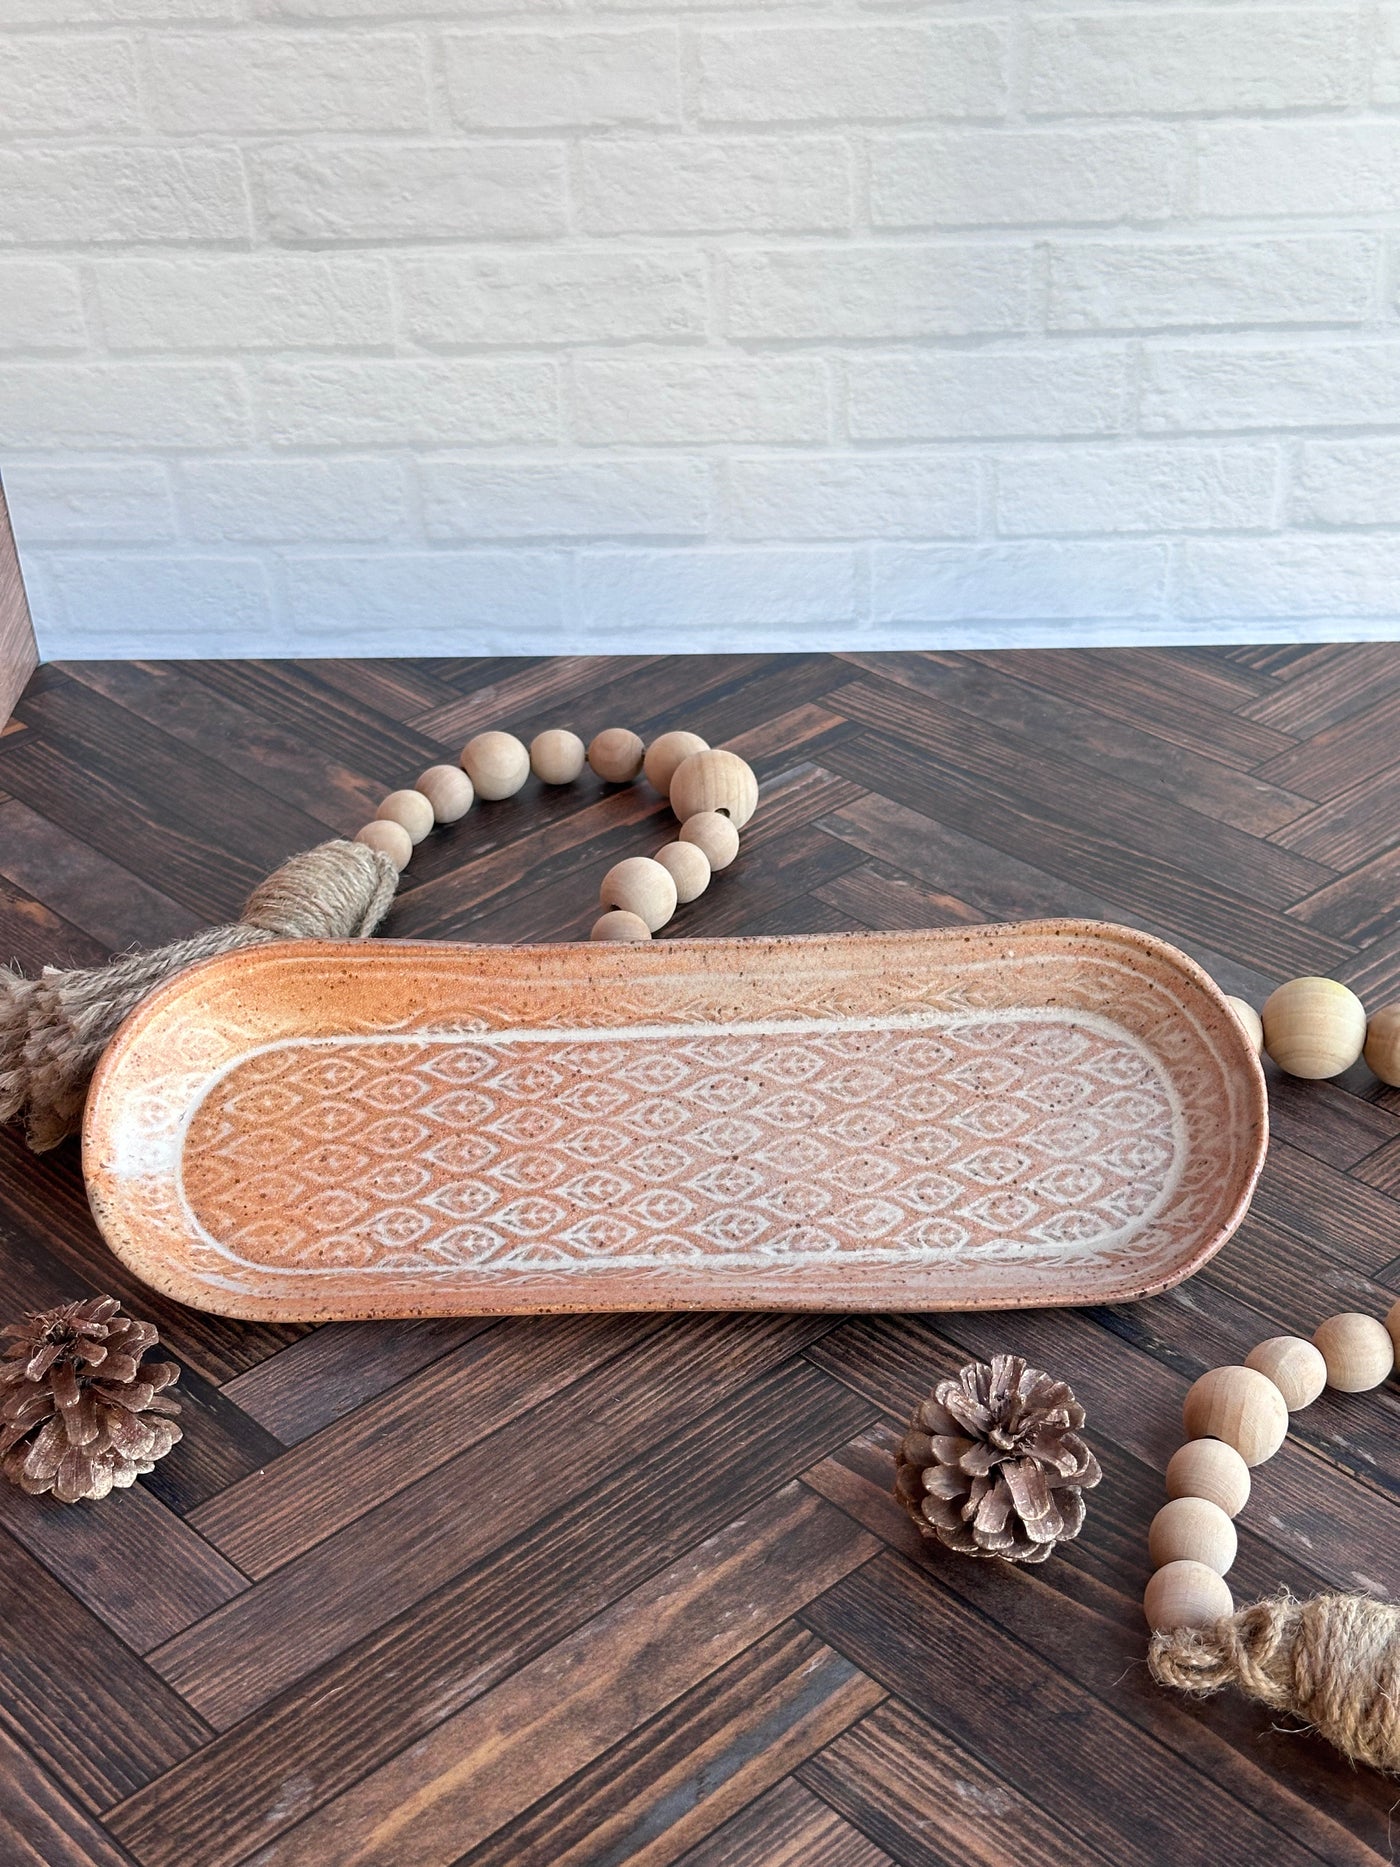 small patterned ceramic tray in natural color